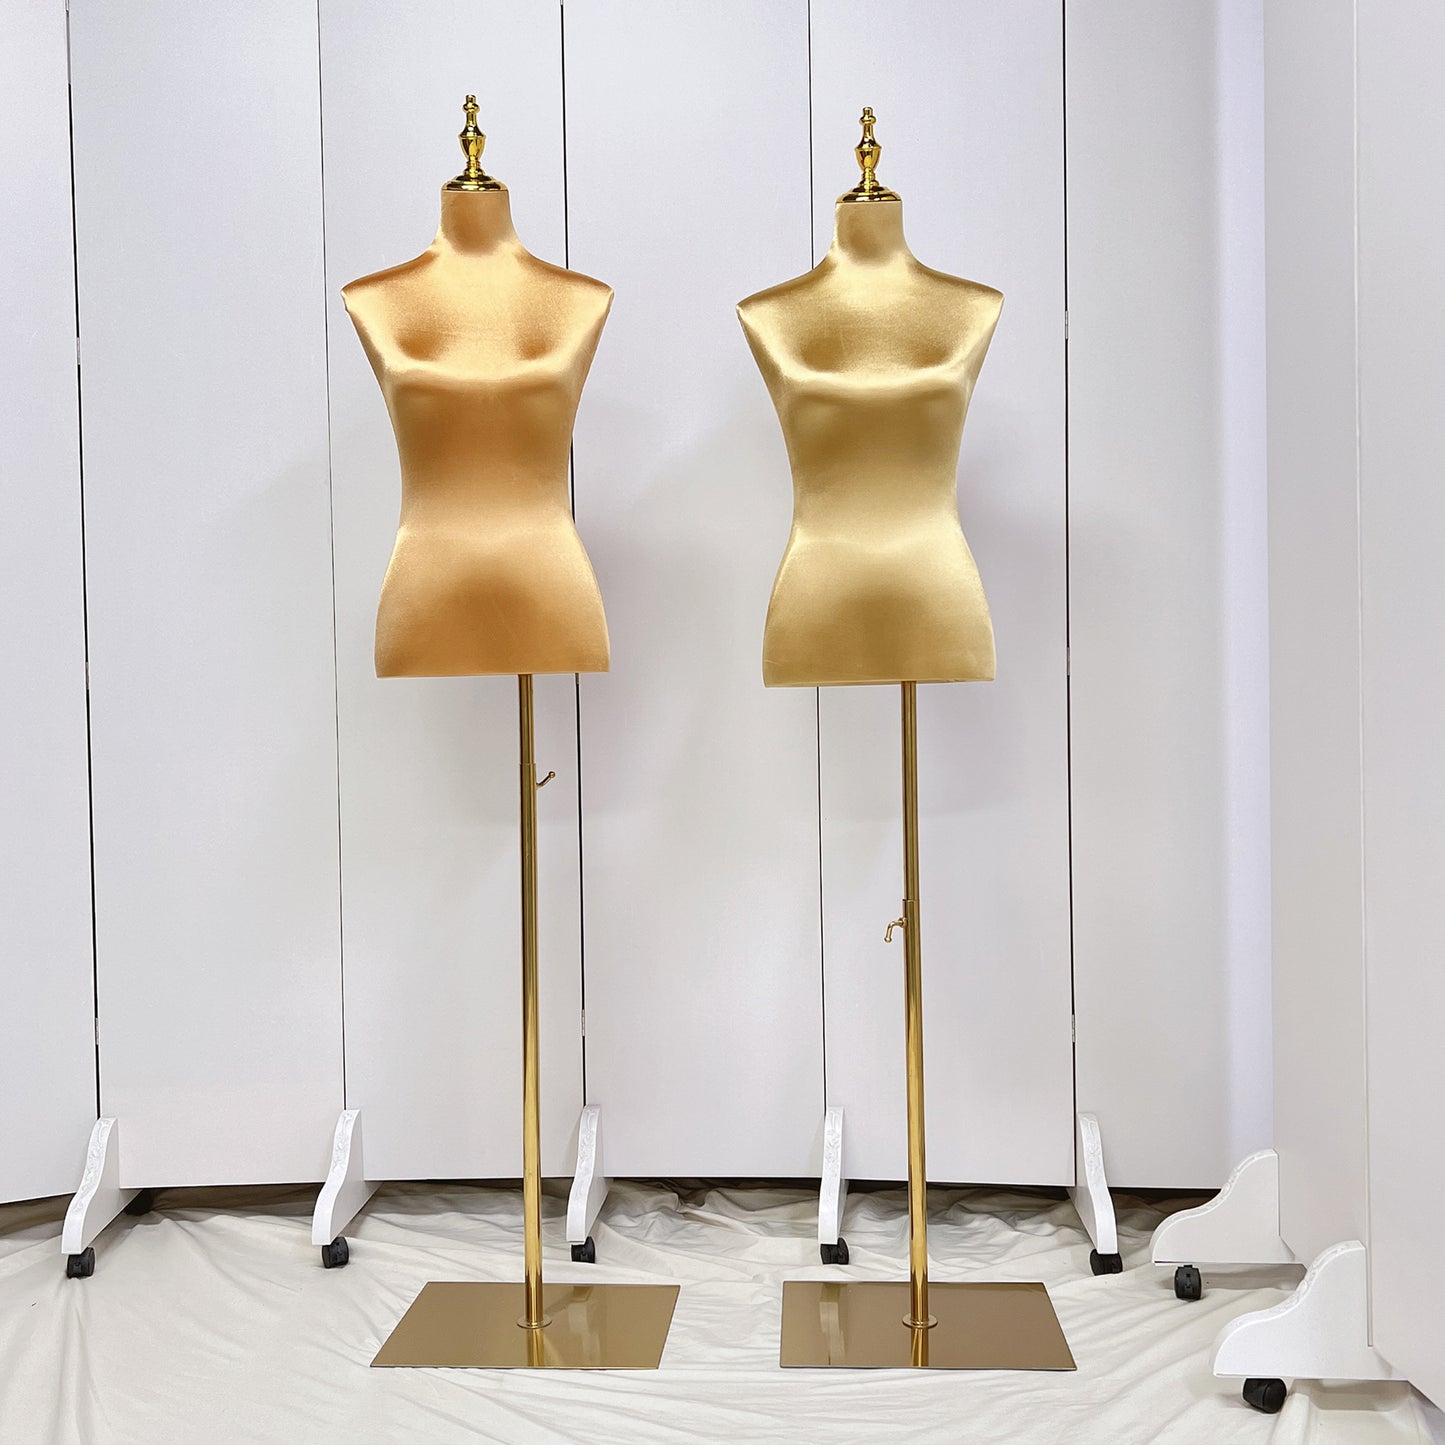 Jelimate Cheap Colorful Headless Satin Mannequin Upper Body,Clothing Mannequin Torso Female Dress Form,Fashion Showroom Shop Window Display Model Props